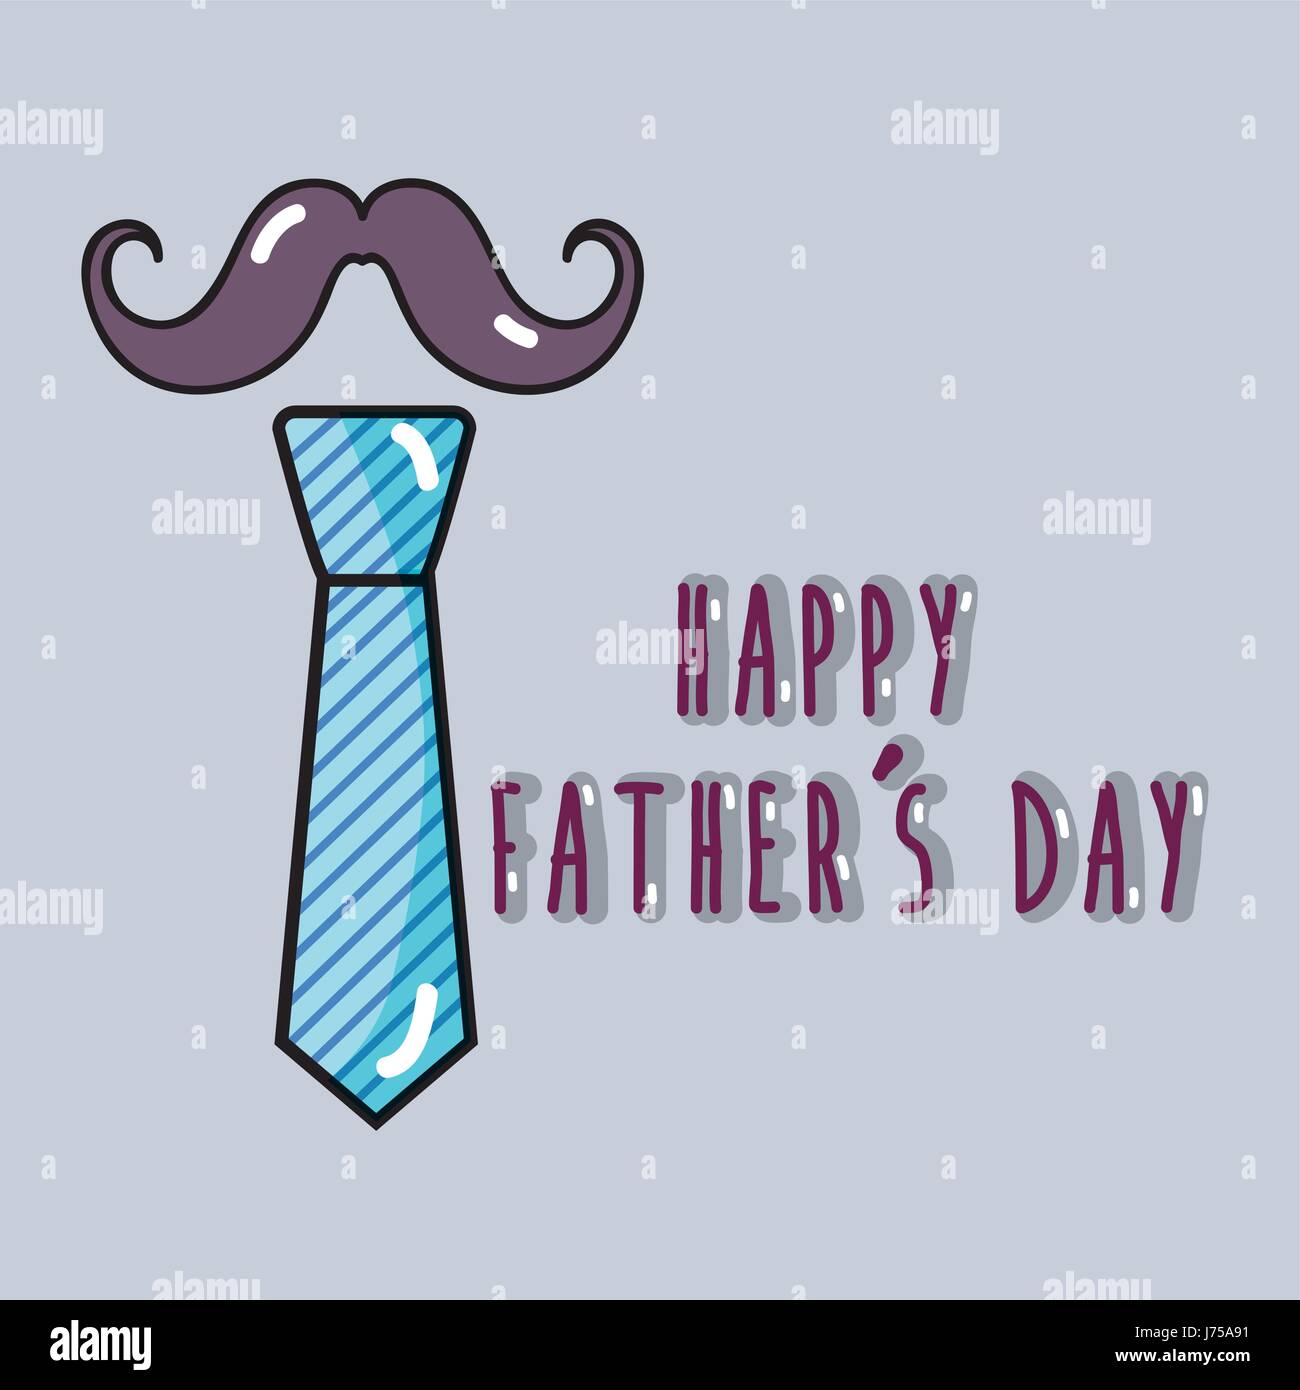 fathers day card decoration